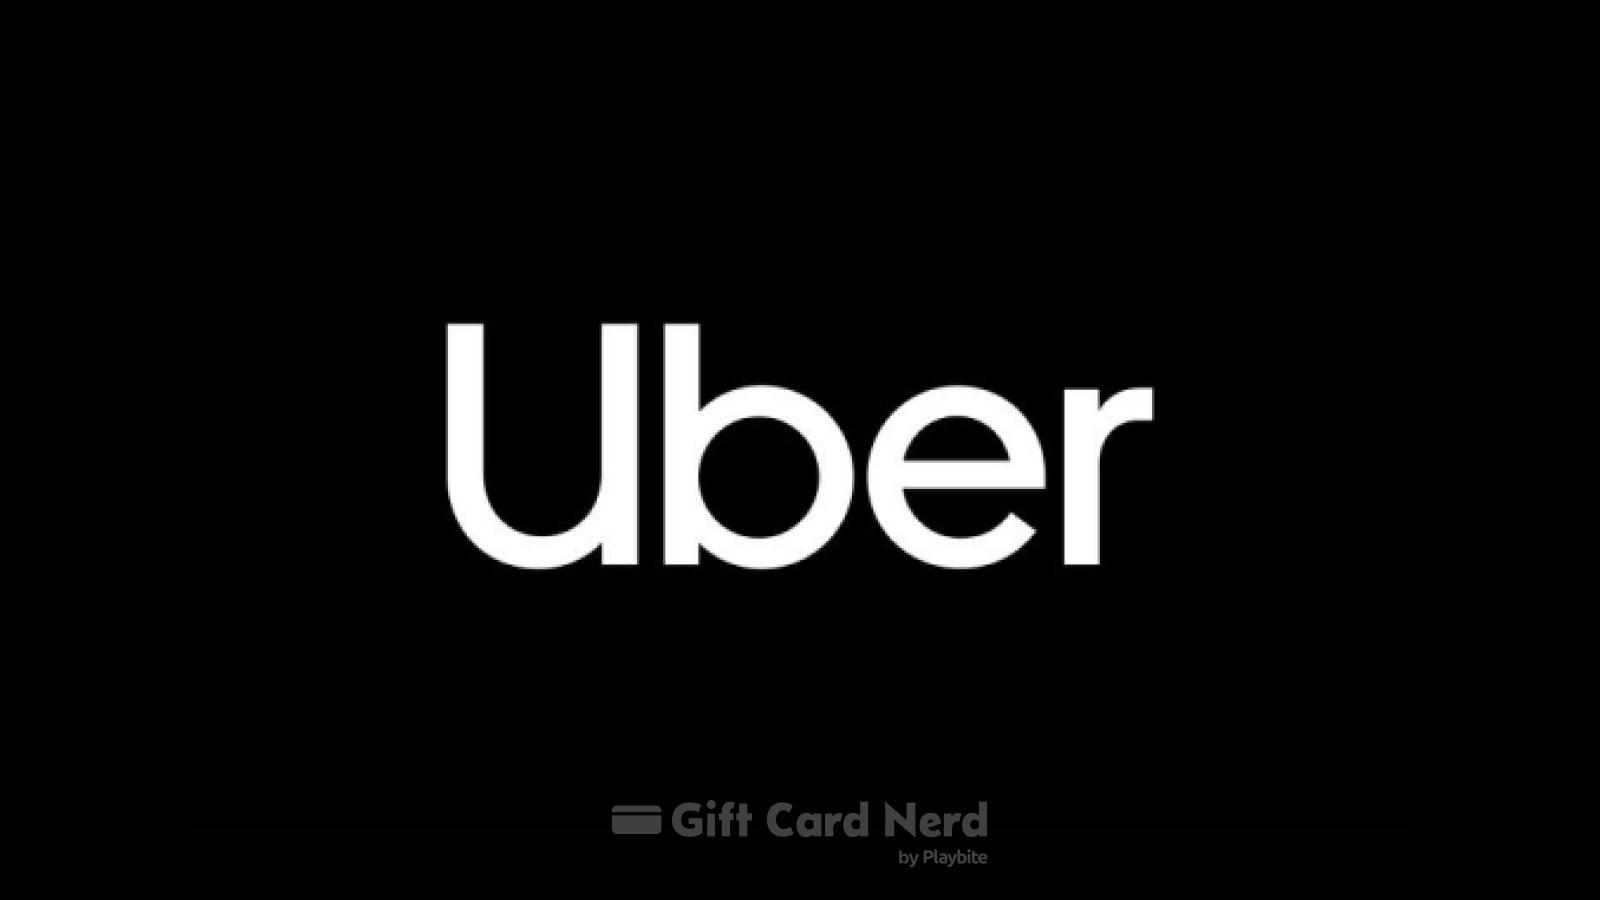 Can I Use an Uber Gift Card on Amazon?